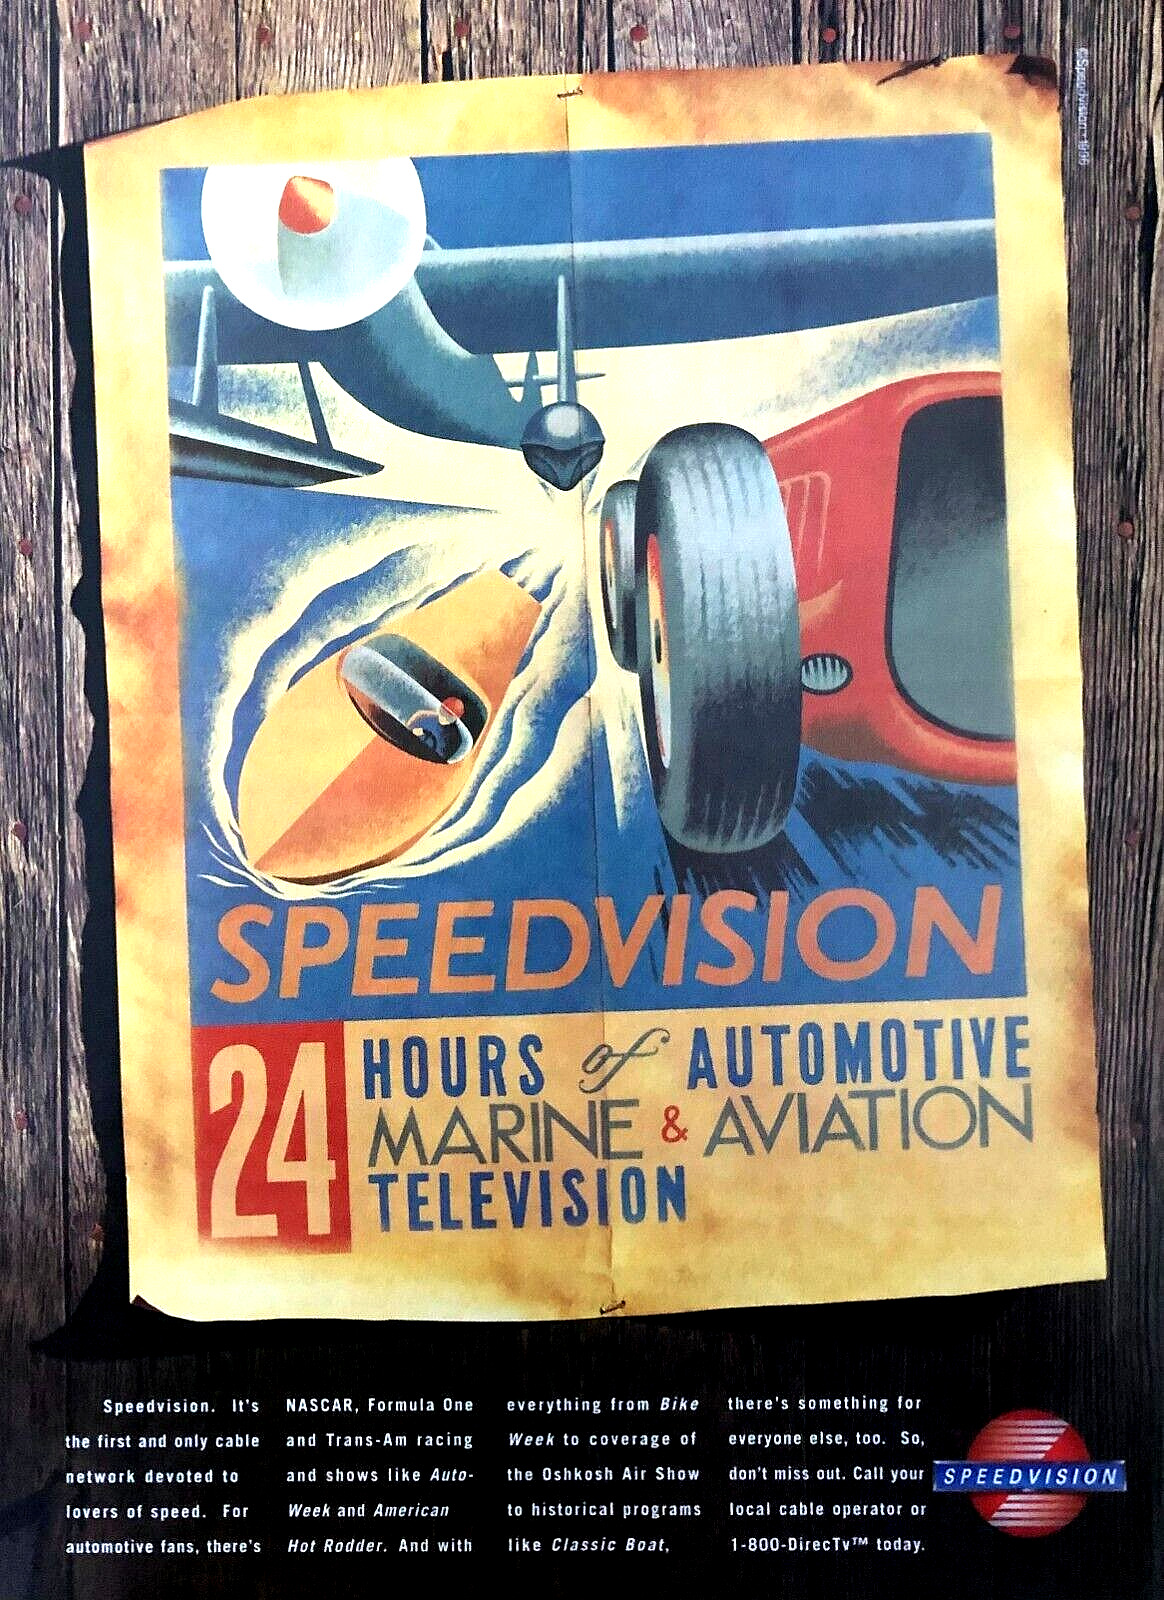 SPEEDVISION CABLE TELEVISION TV NETWORK—VINTAGE 1996 MAGAZINE PRINT AD